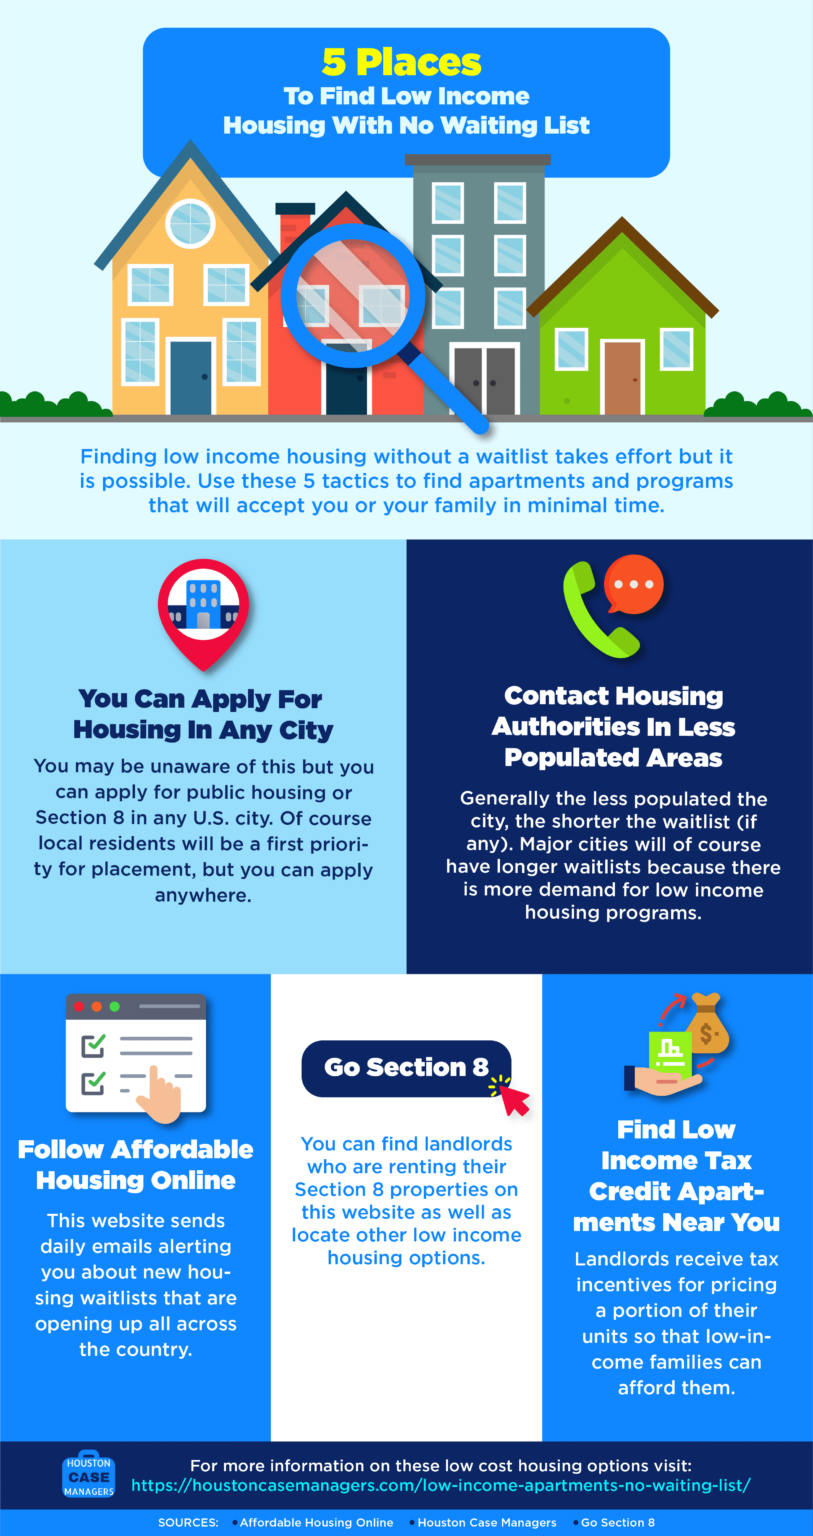 Housing With No Waiting List (7 Ways To Find Housing)